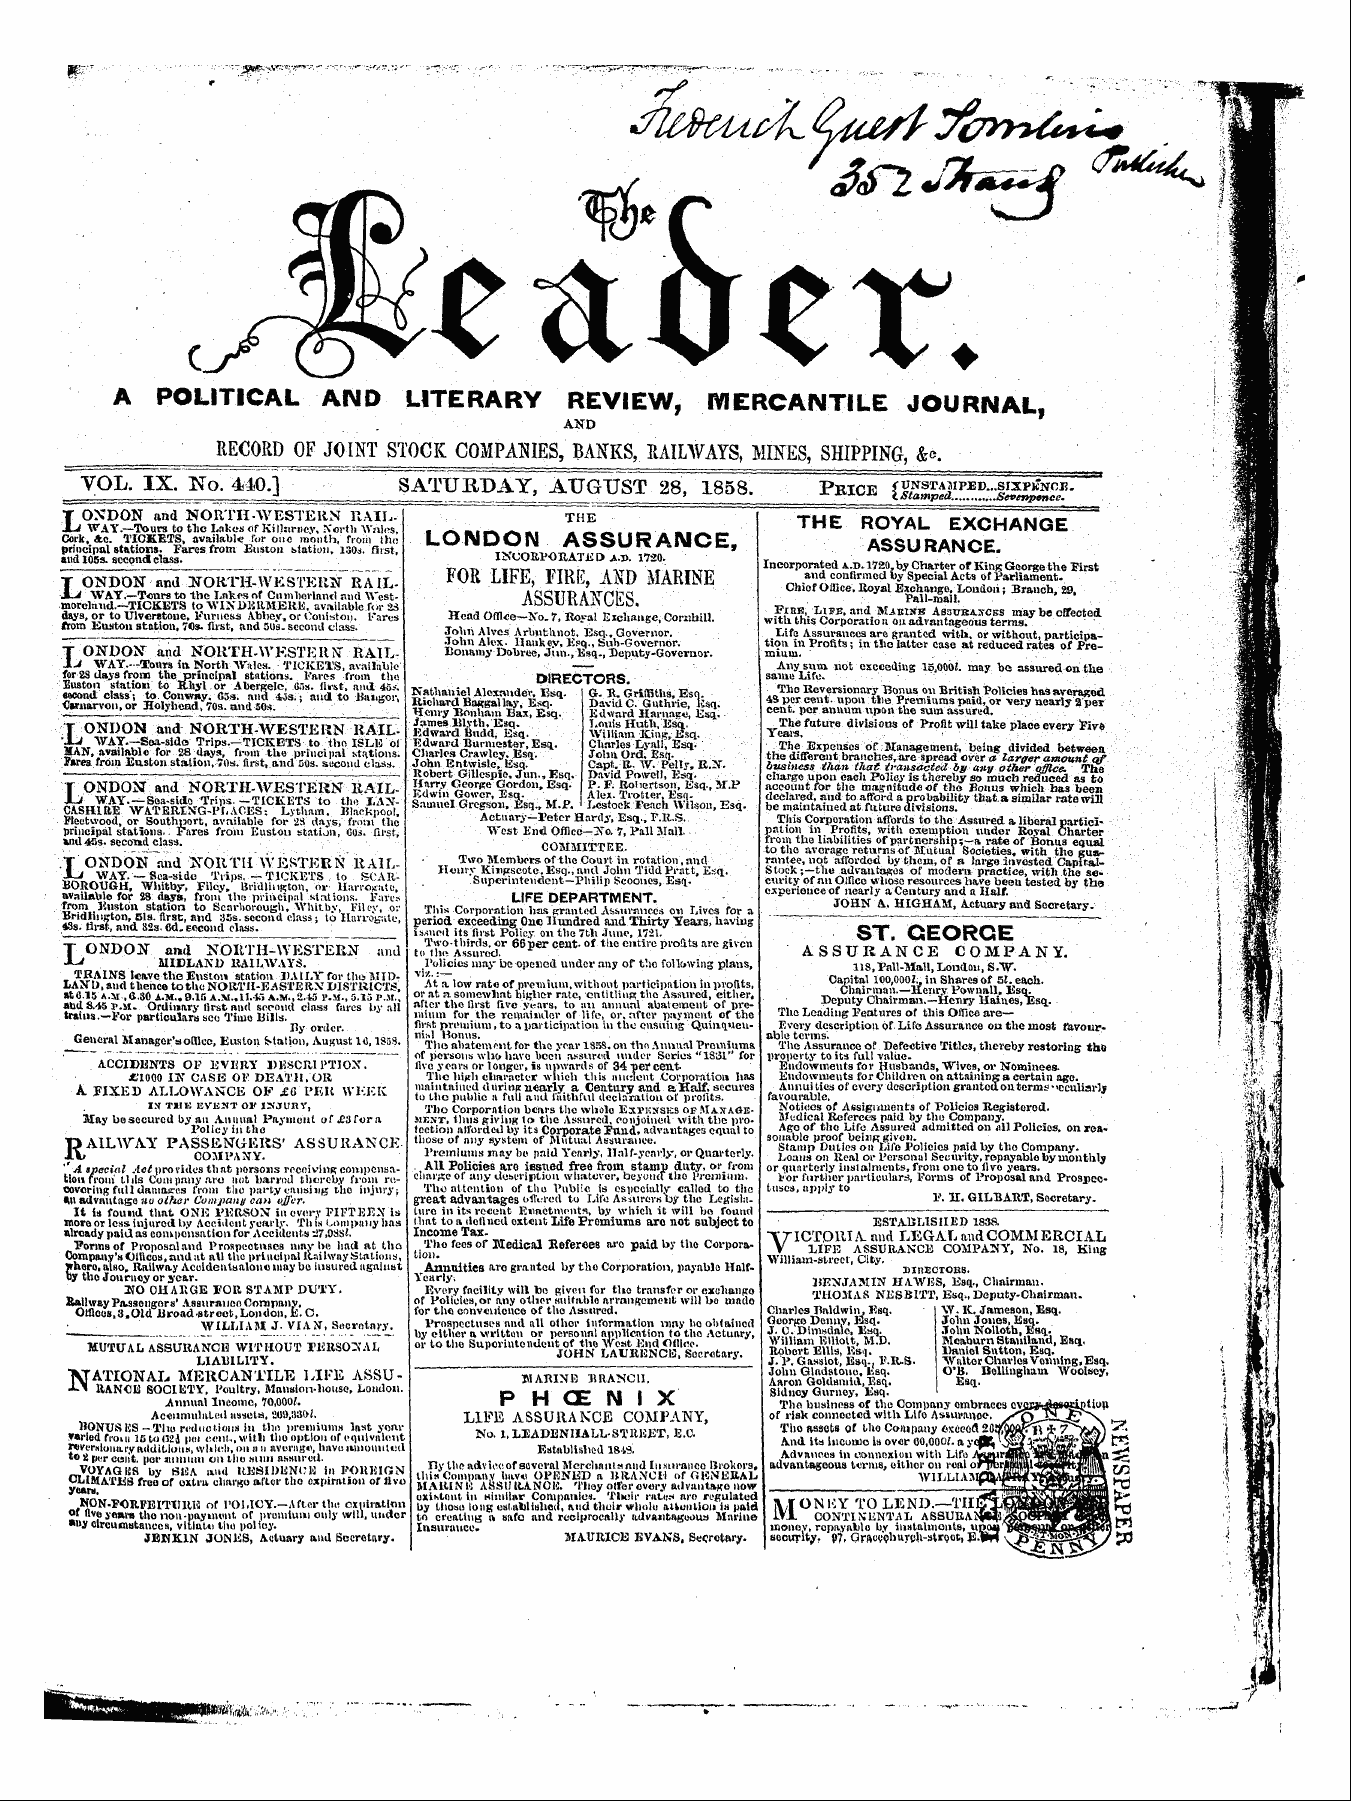 Leader (1850-1860): jS F Y, 1st edition - Ad00103